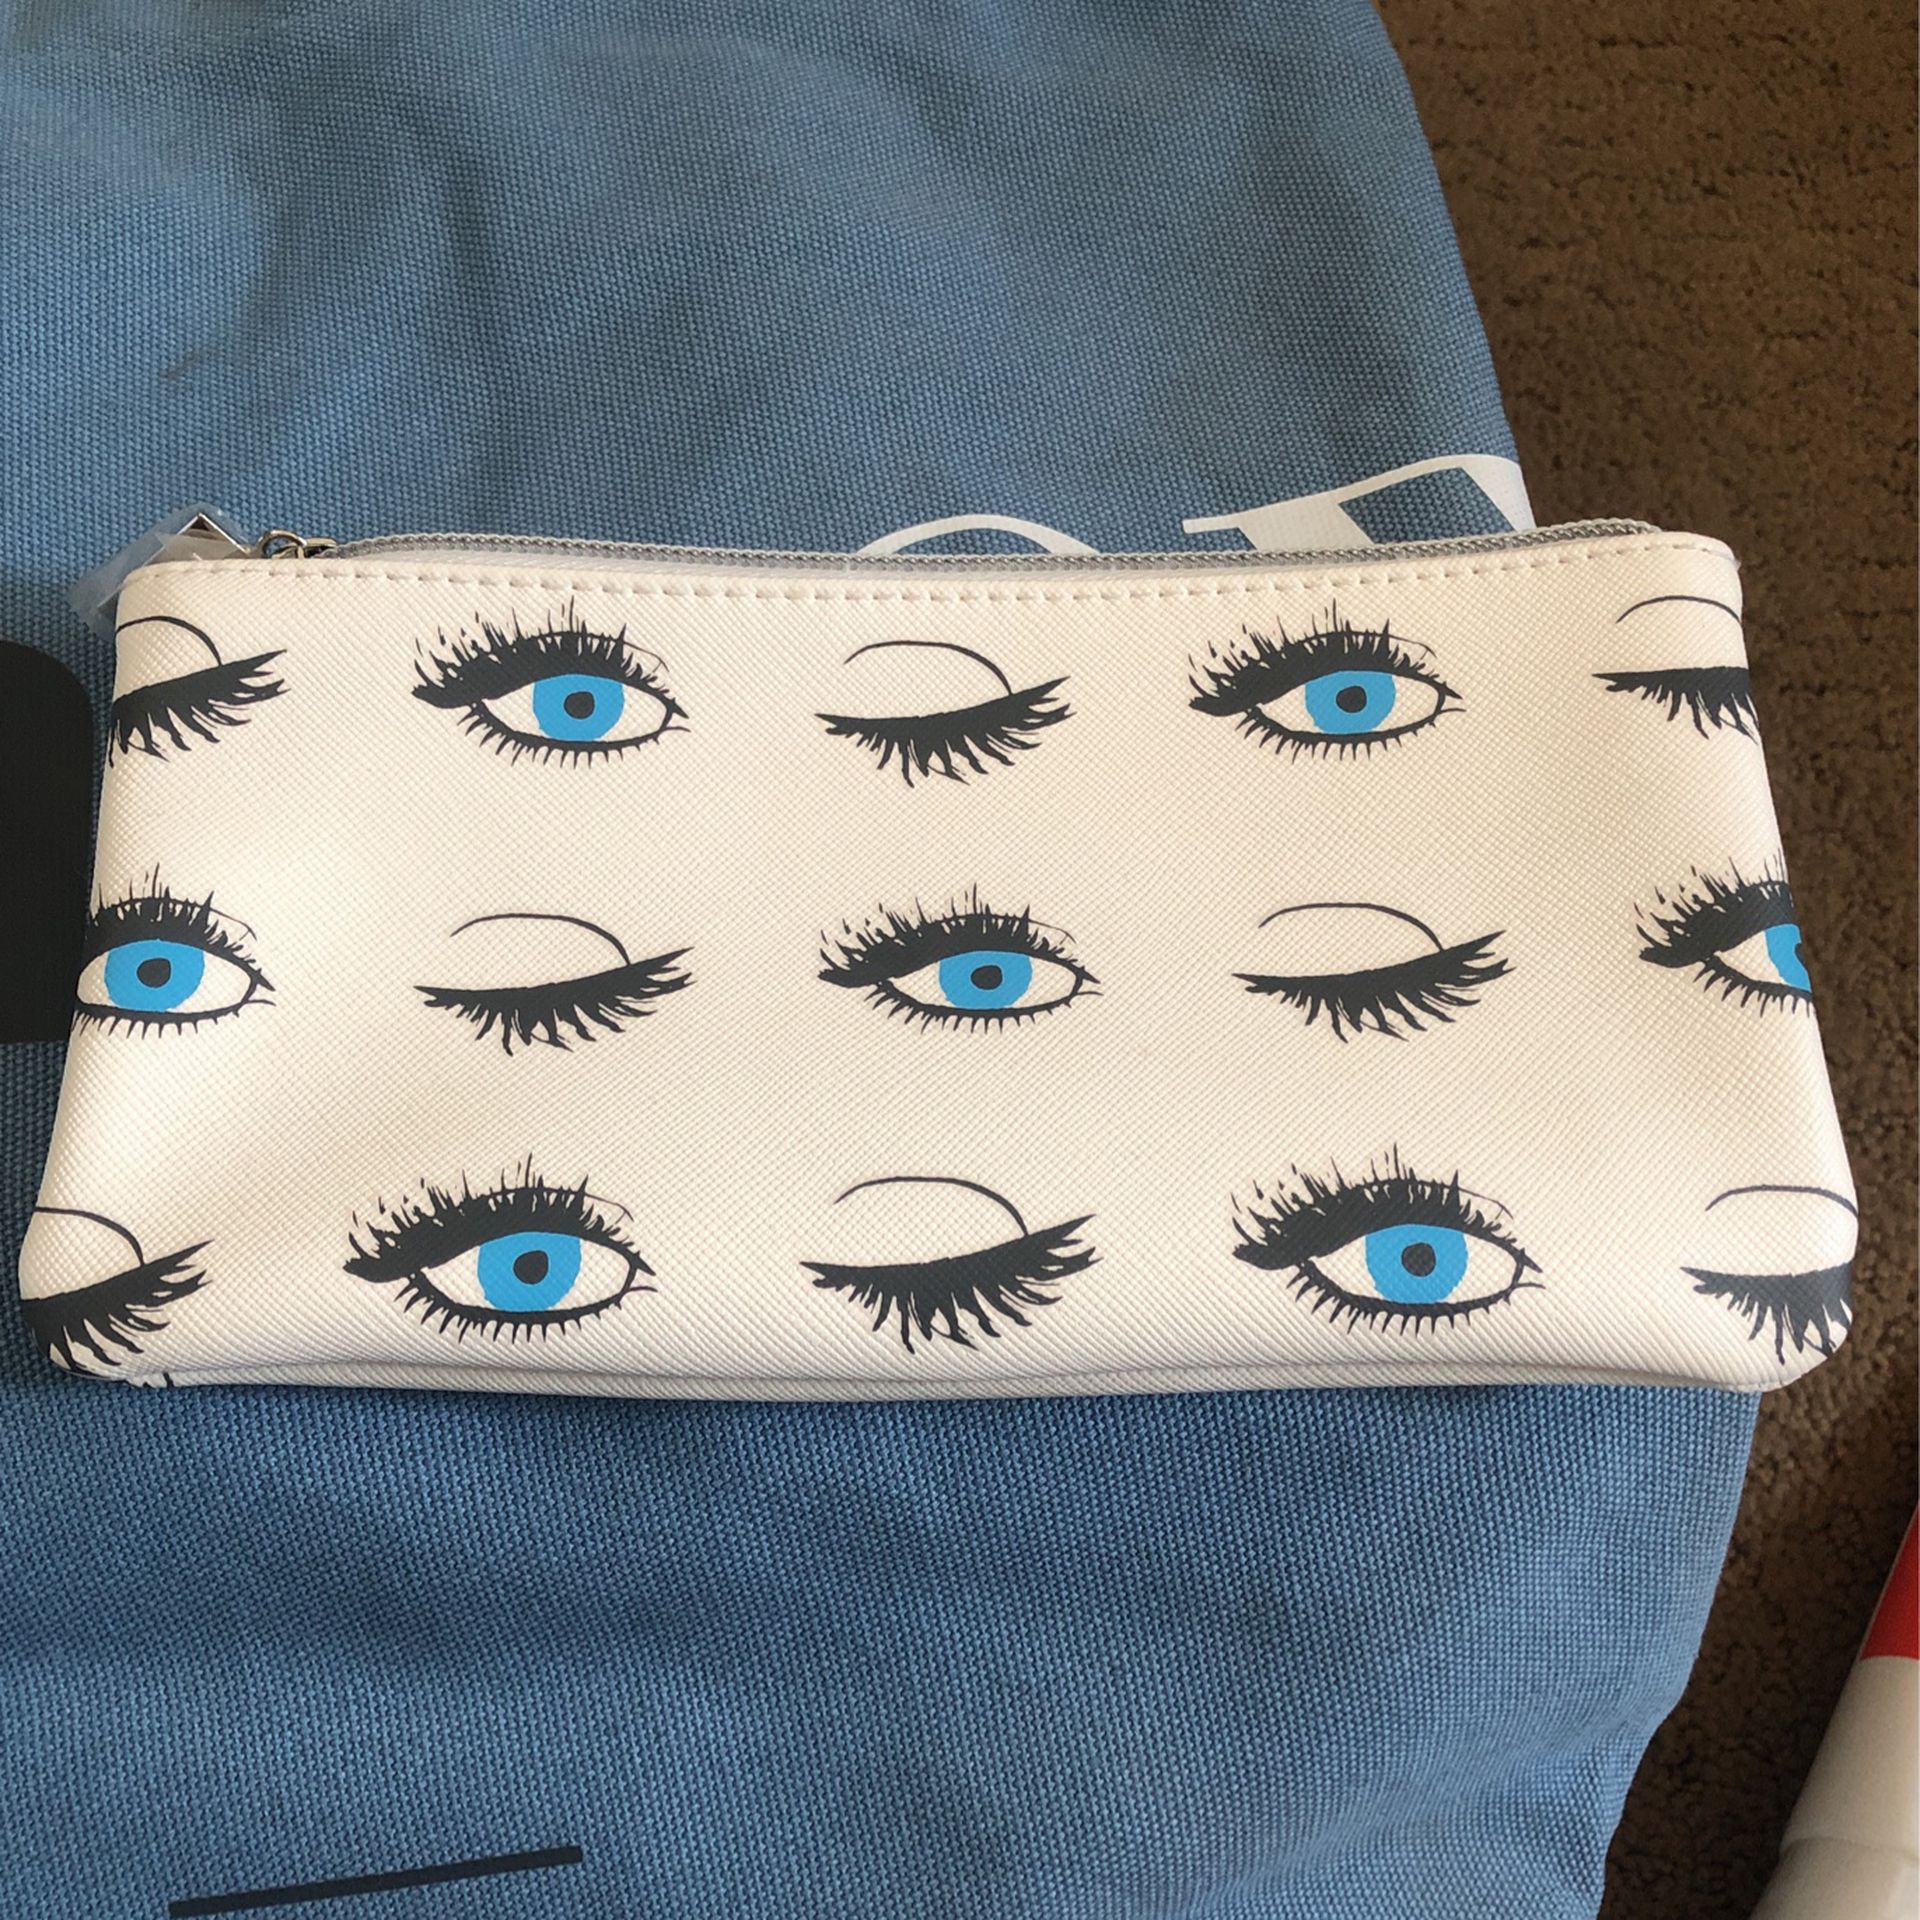 Rodan and fields Empower bag and lash boost mini bag